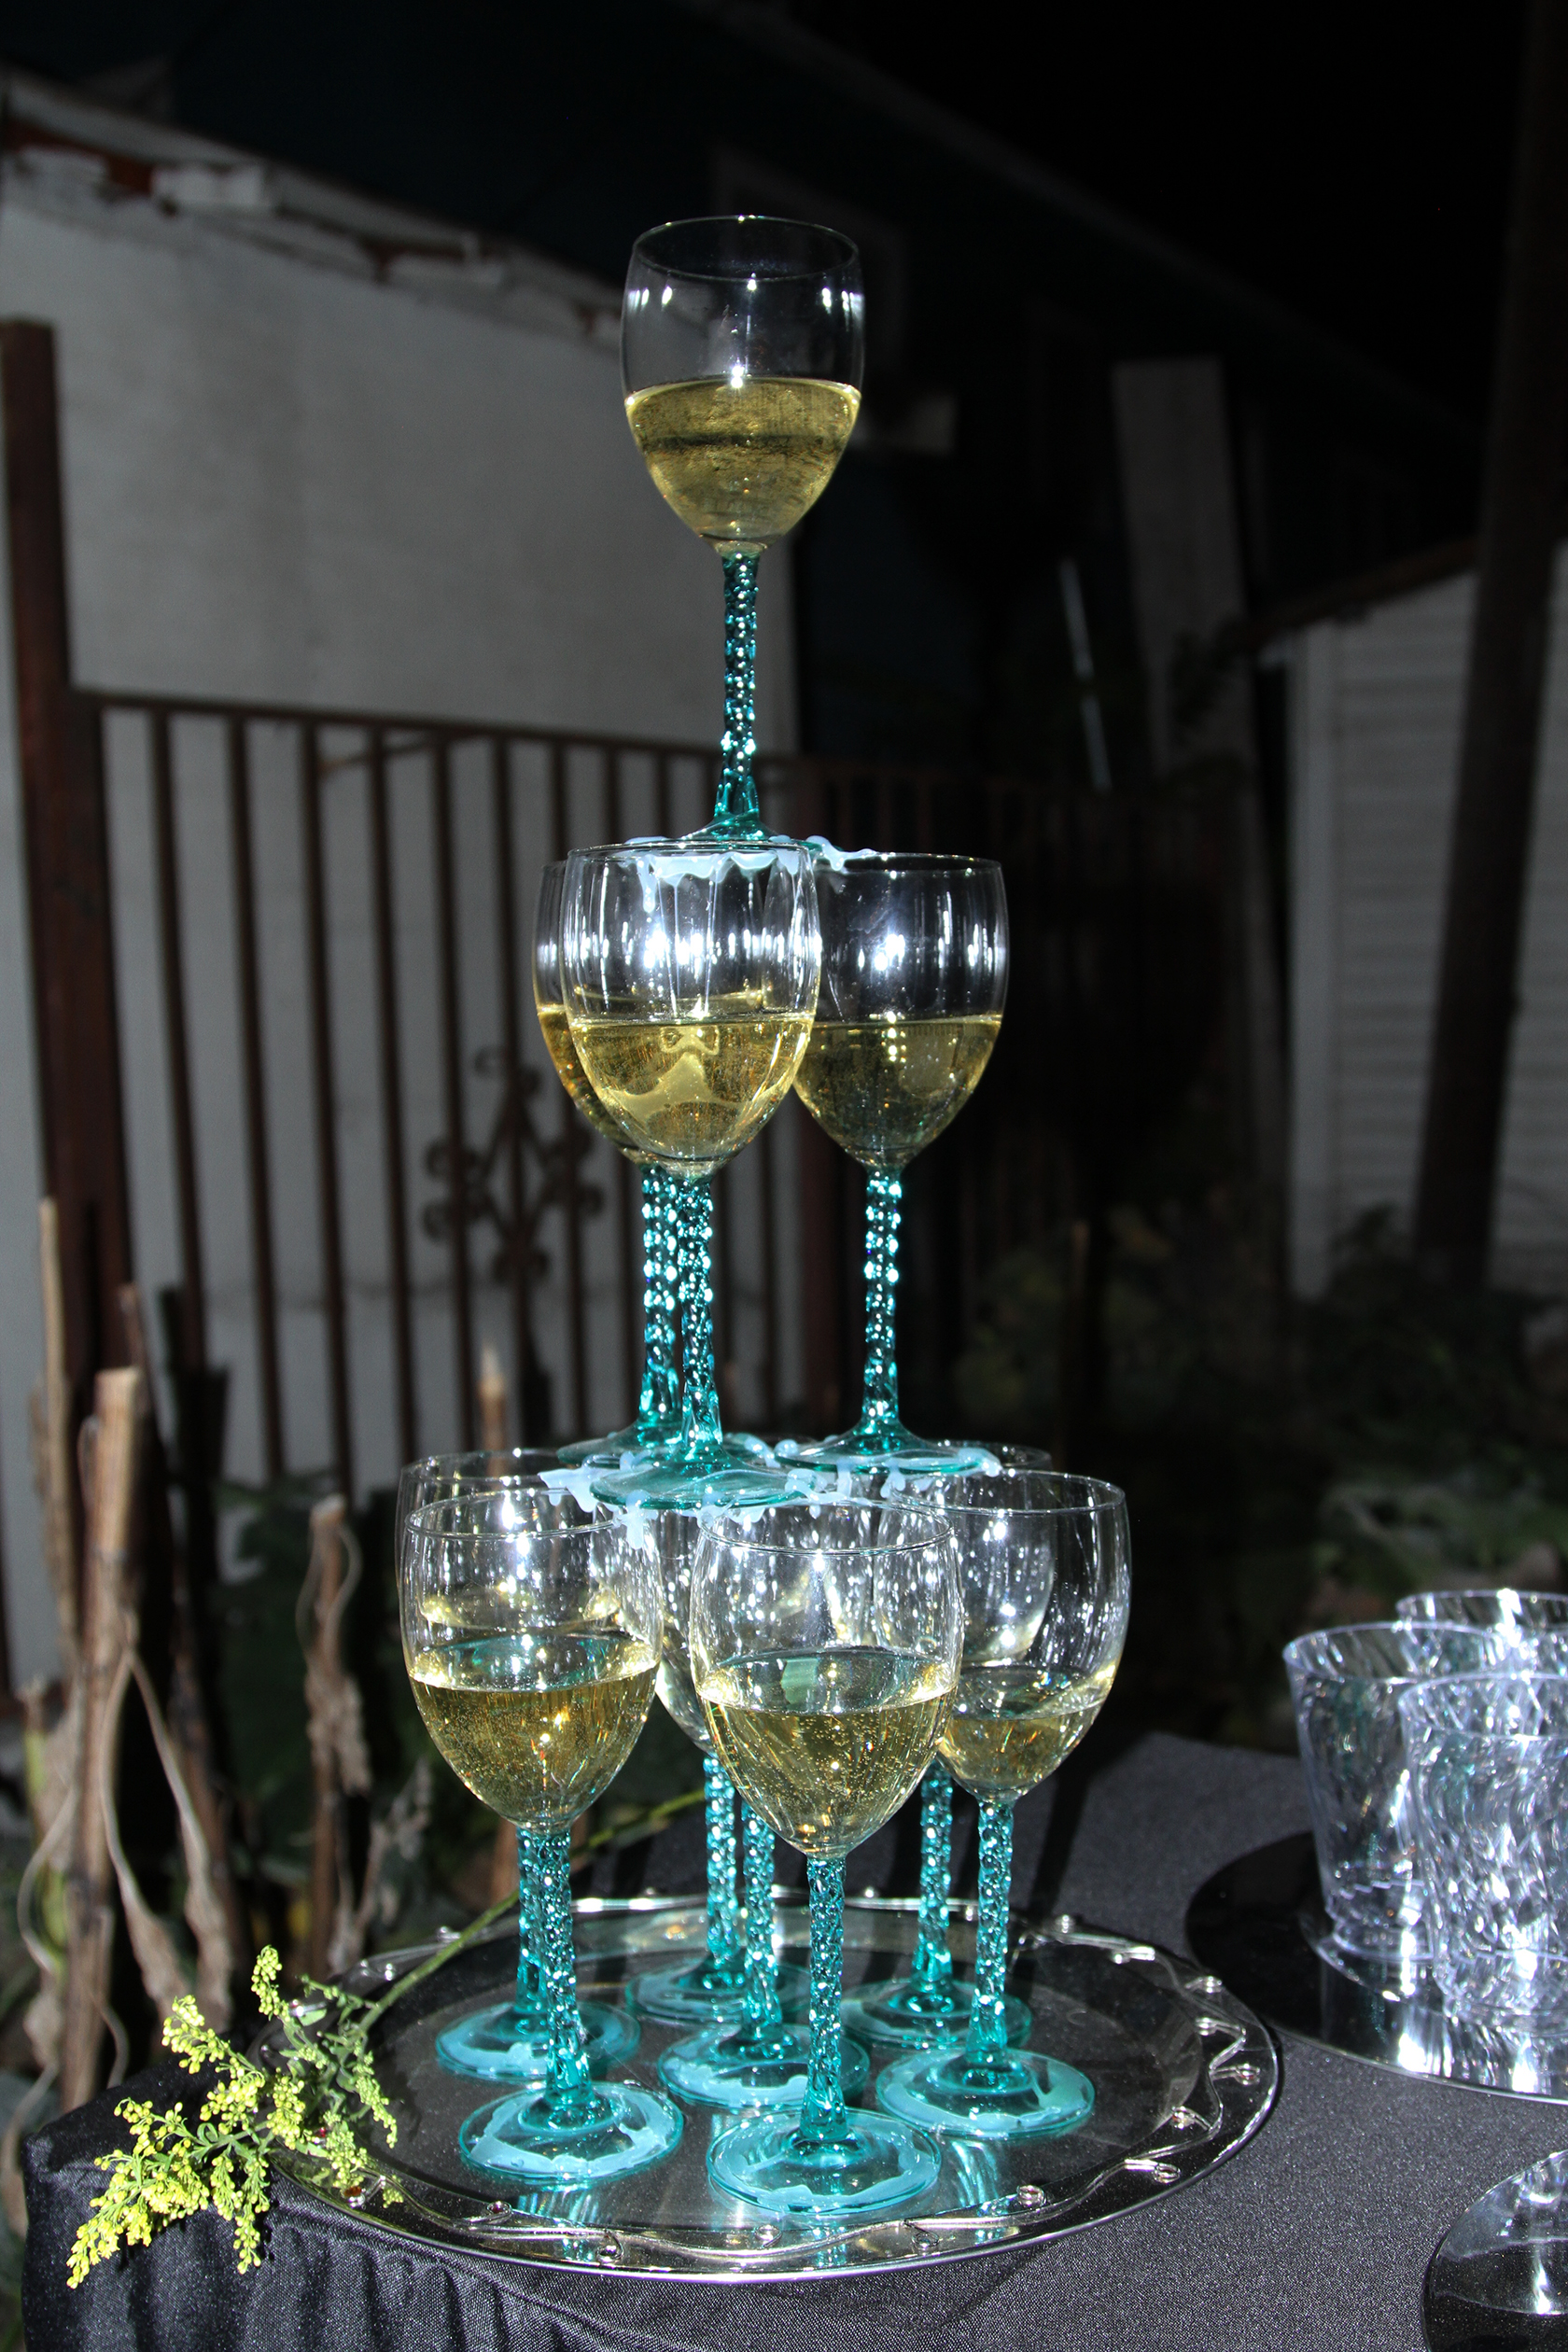 Tower of champaign glasses on a silver tray